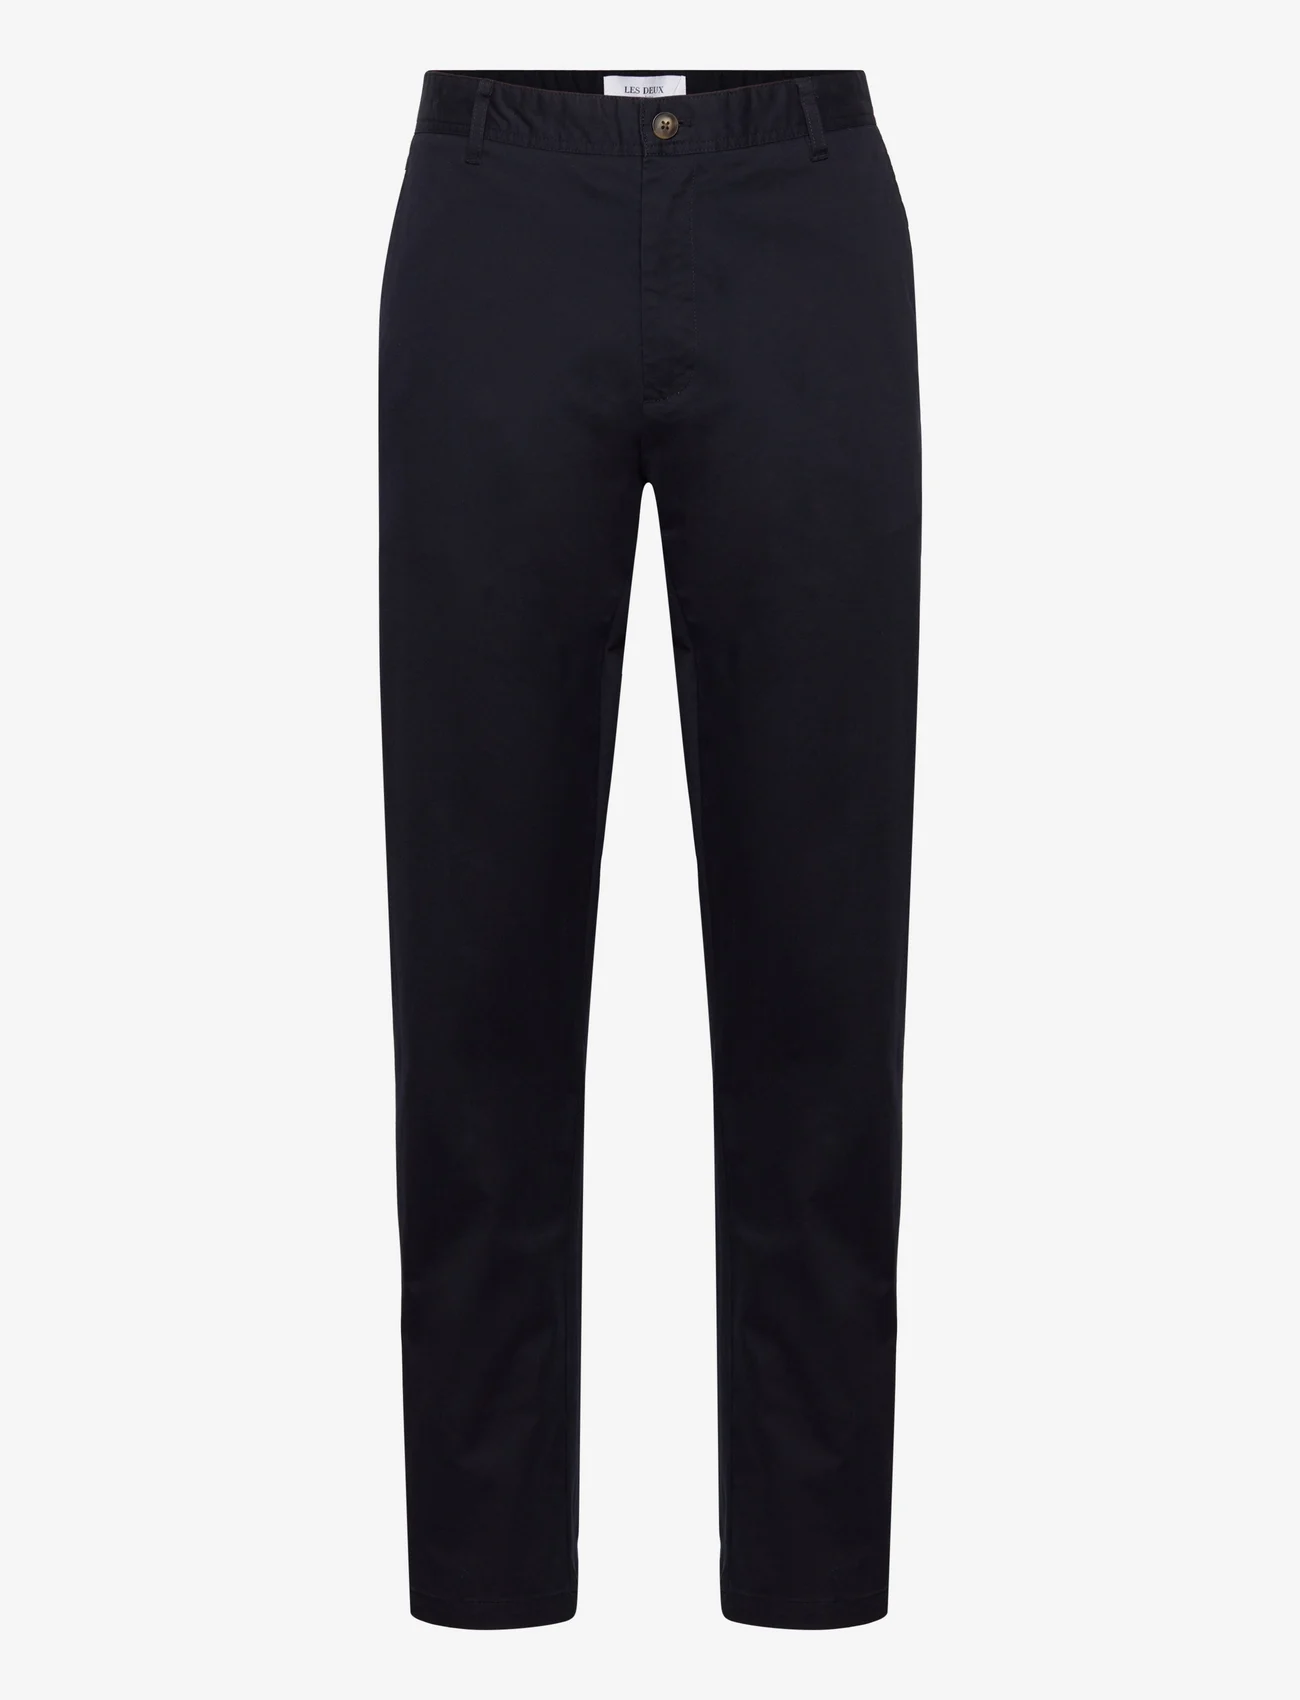 Les Deux - Jared Twill Chino Pants - nordic style - dark navy - 1